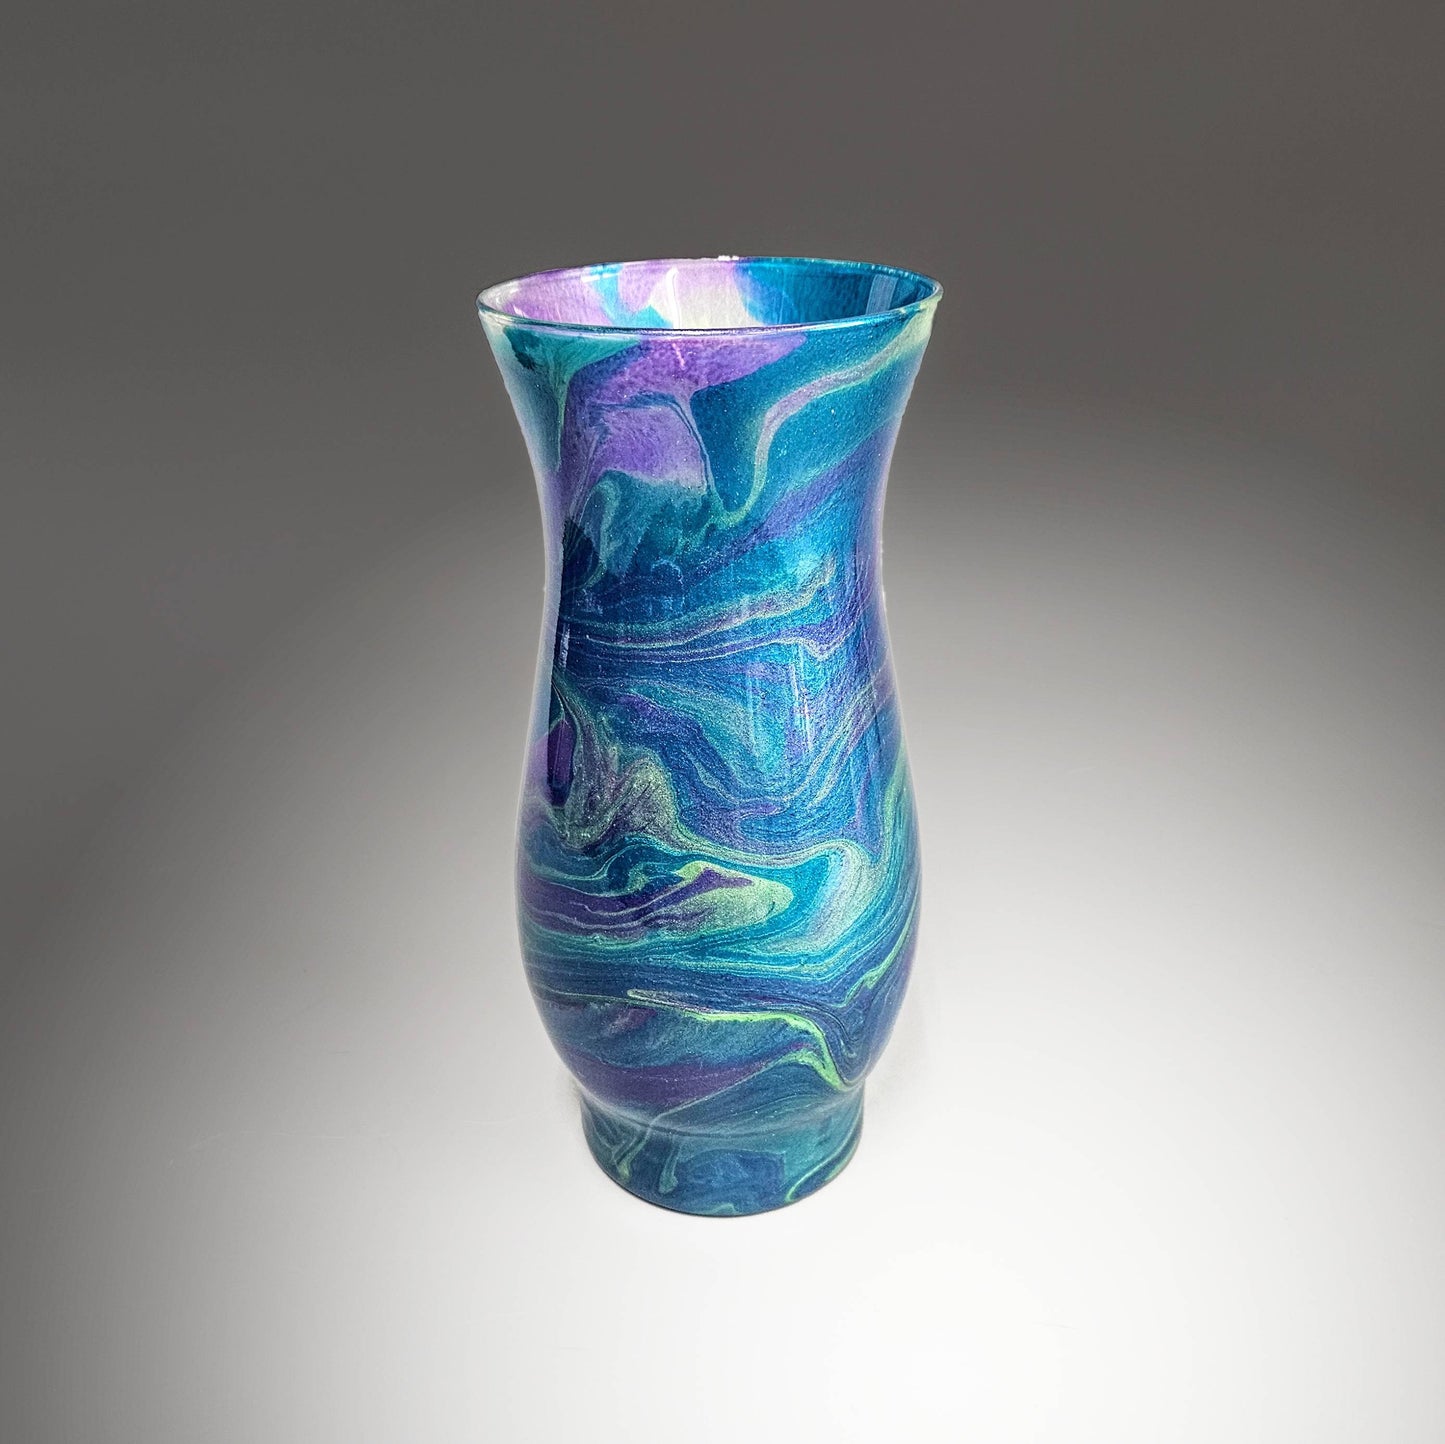 Painted Glass Vase in Teal Purple Gold